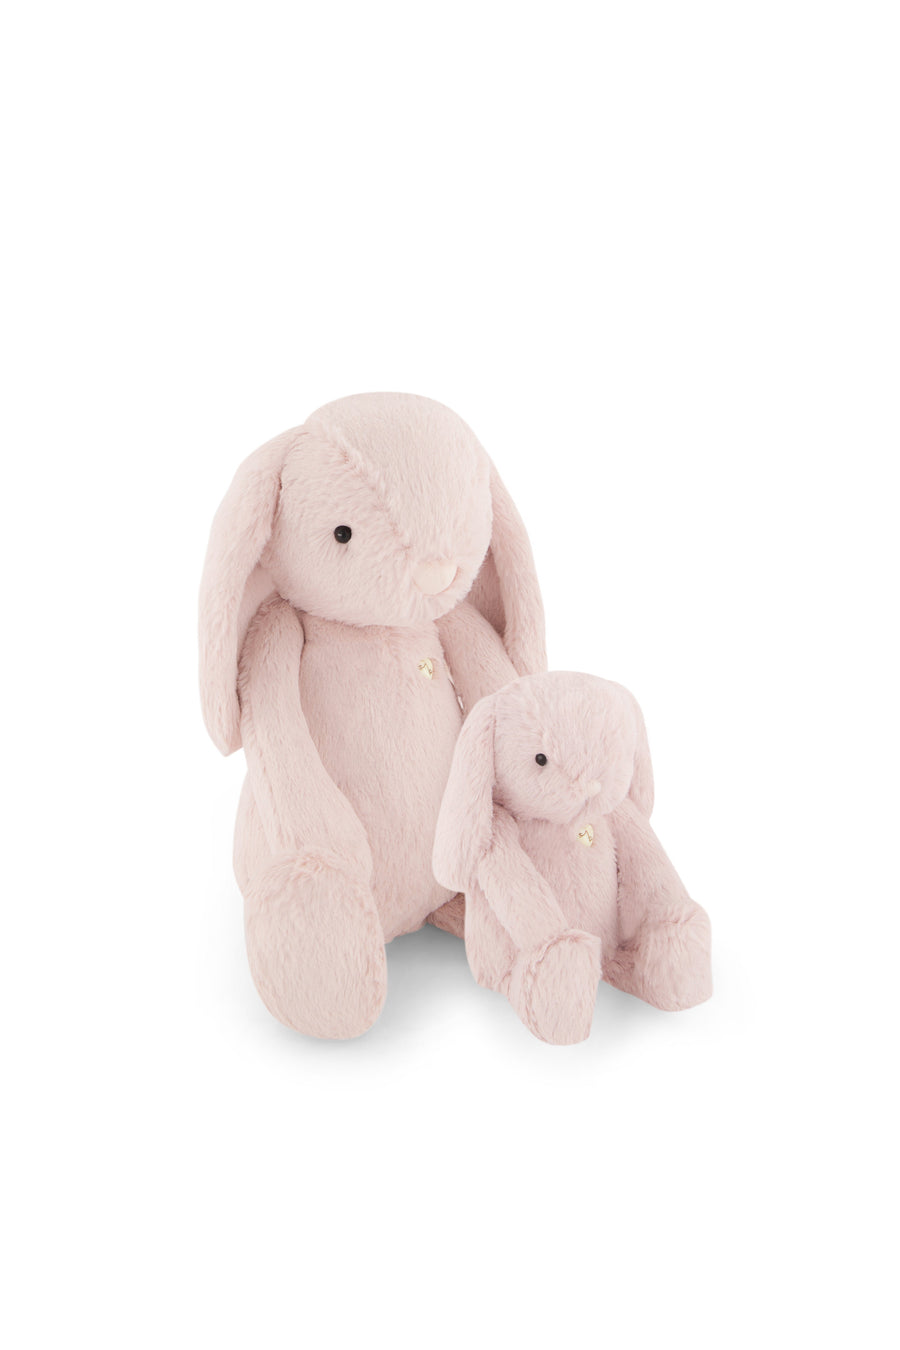 Snuggle Bunnies - Penelope the Bunny - Blush Childrens Toy from Jamie Kay NZ